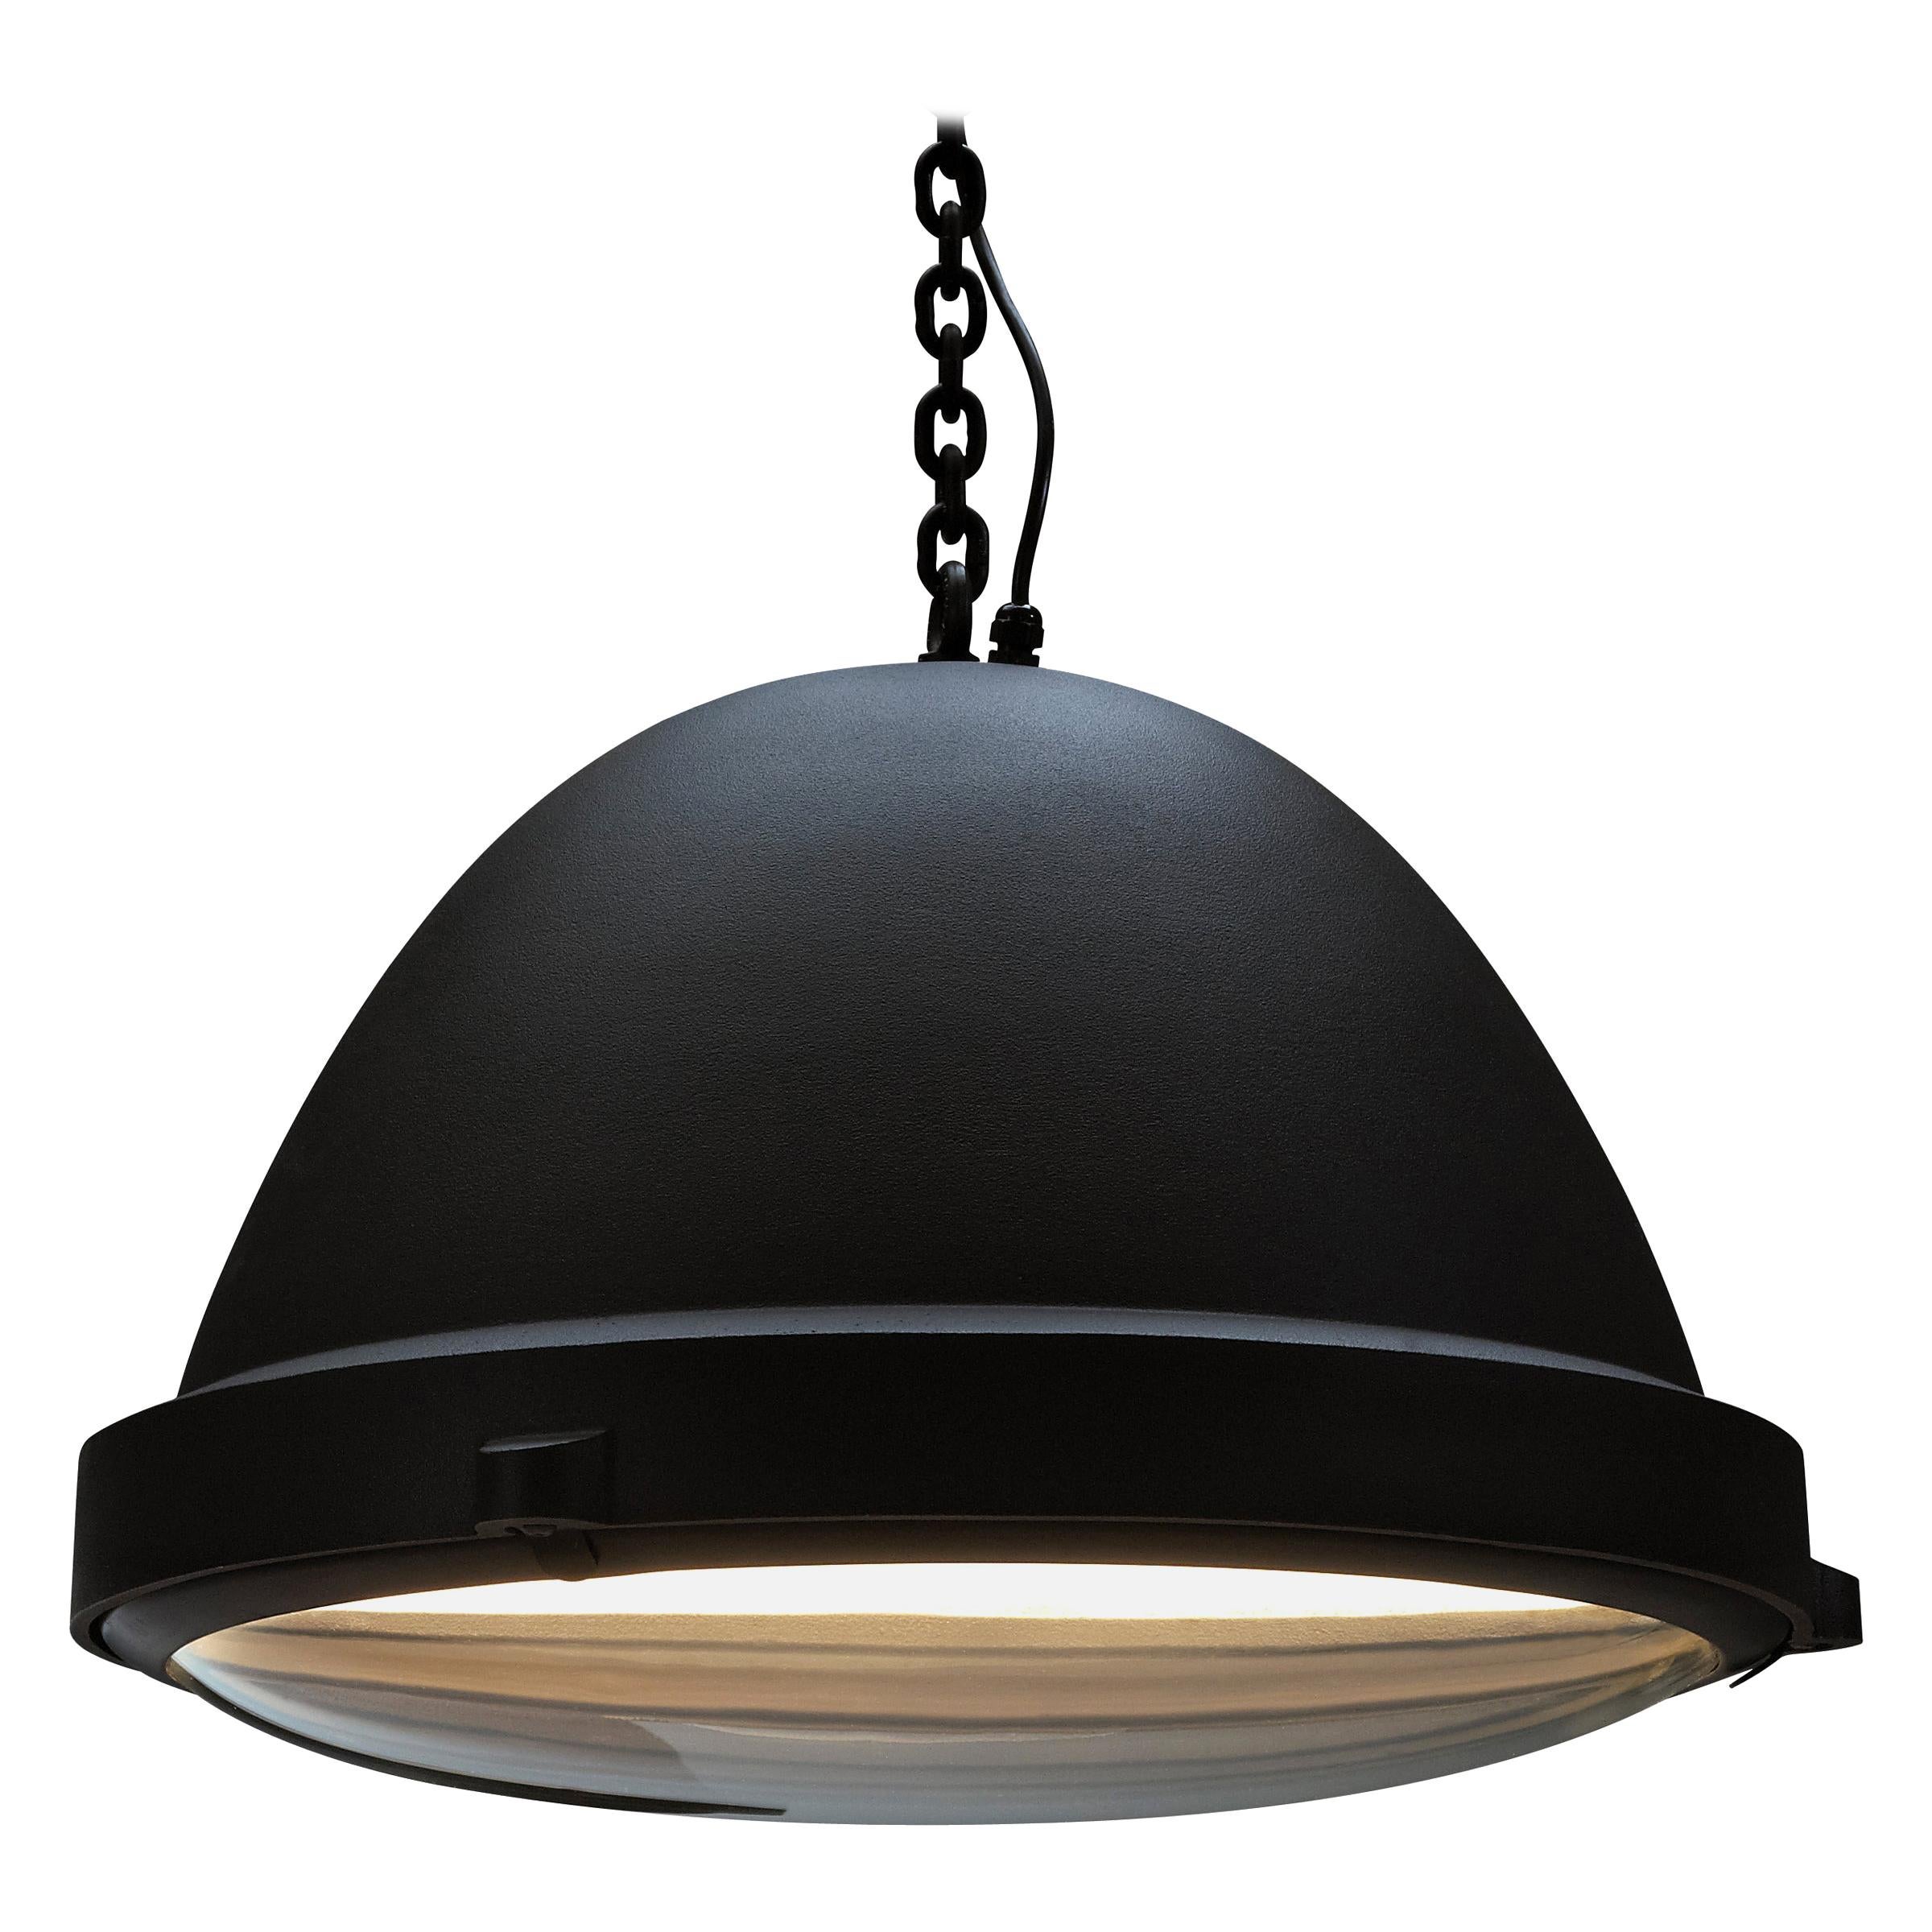 For Sale: Black (OS.01.SU.BL) Outsider Pendant Light Extra Large by Jacco Maris